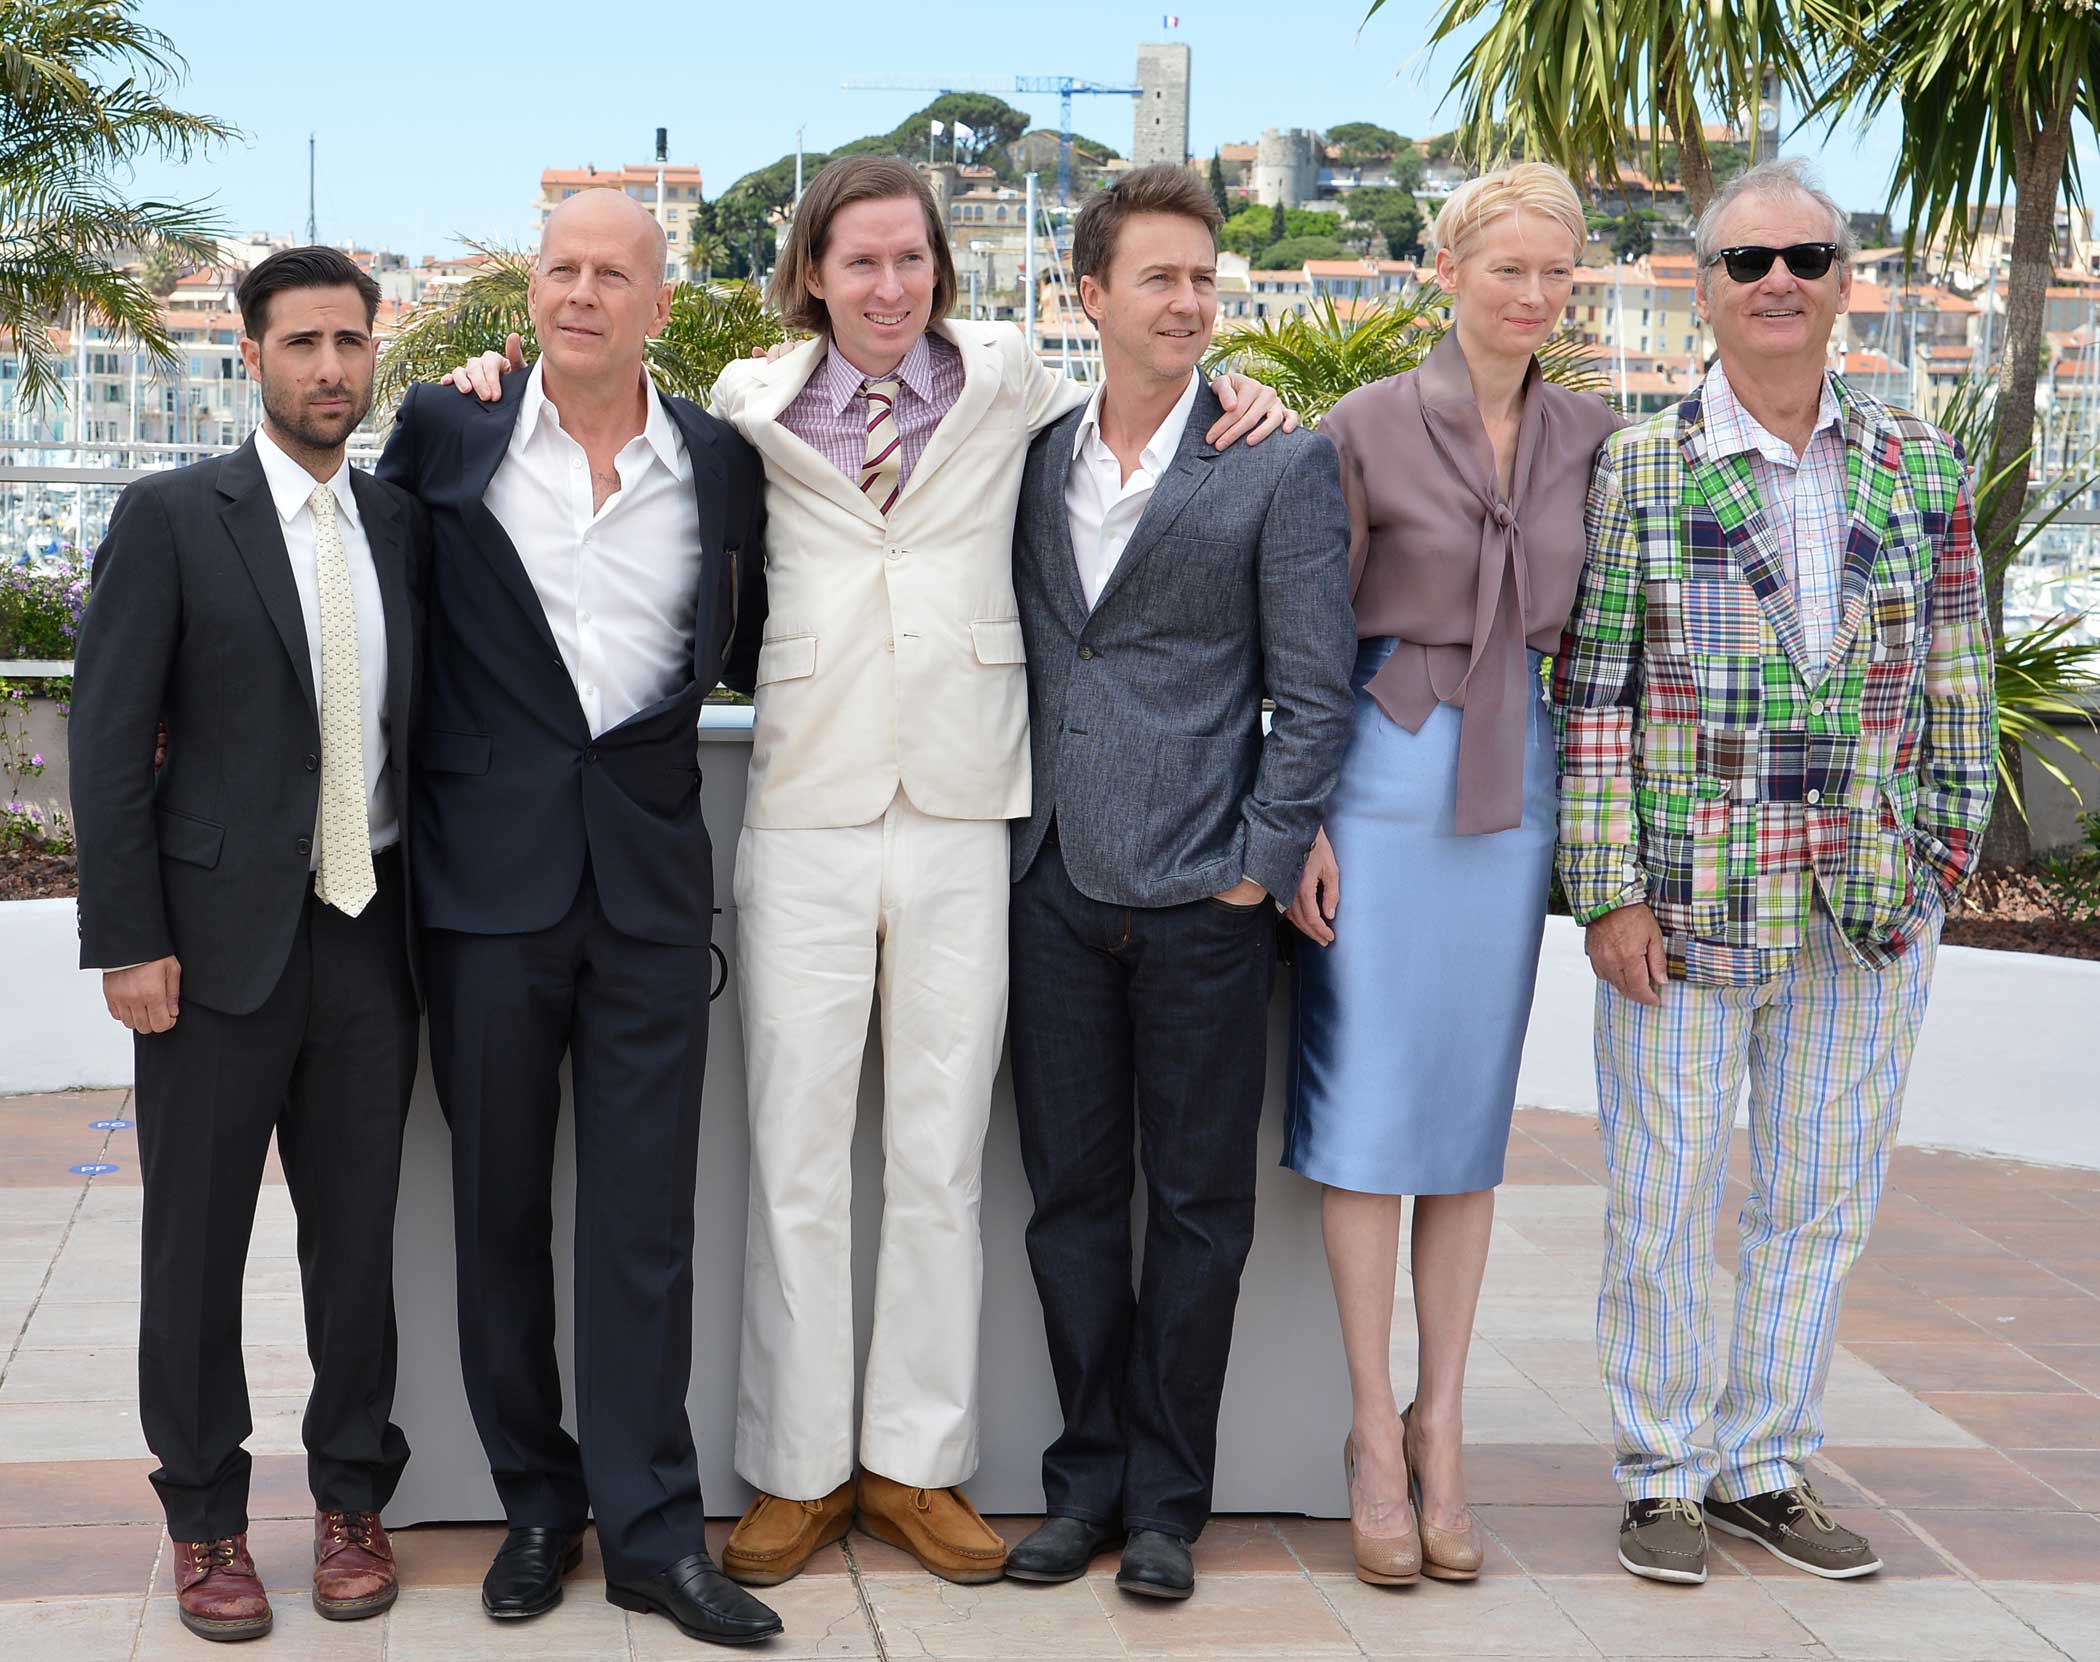 From left: Jason Schwartzman, Bruce Willis, Wes Anderson, Edward Norton, Tilda Swinton, and Bill Murray promote Moonrise Kingdom at the 65th Cannes Film Festival on May 16, 2012 in Cannes, France.